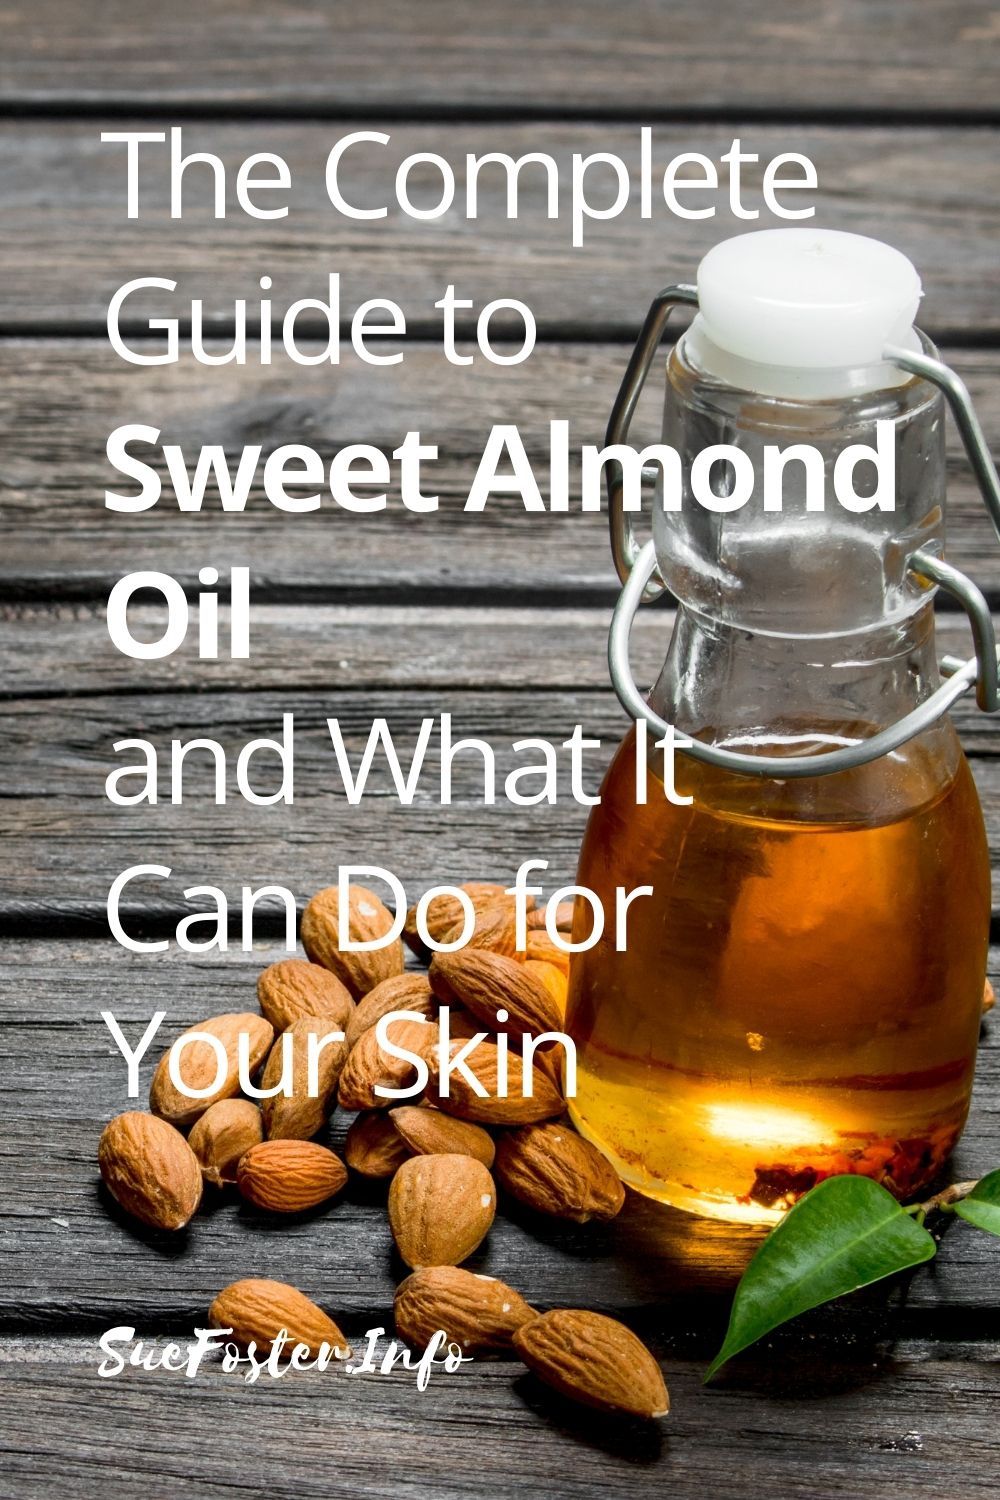 In this article, we will discuss the benefits of sweet almond oil for your skin and how you can incorporate it into your existing skincare routine. Sweet almond oil has many uses, all packed in one bottle.